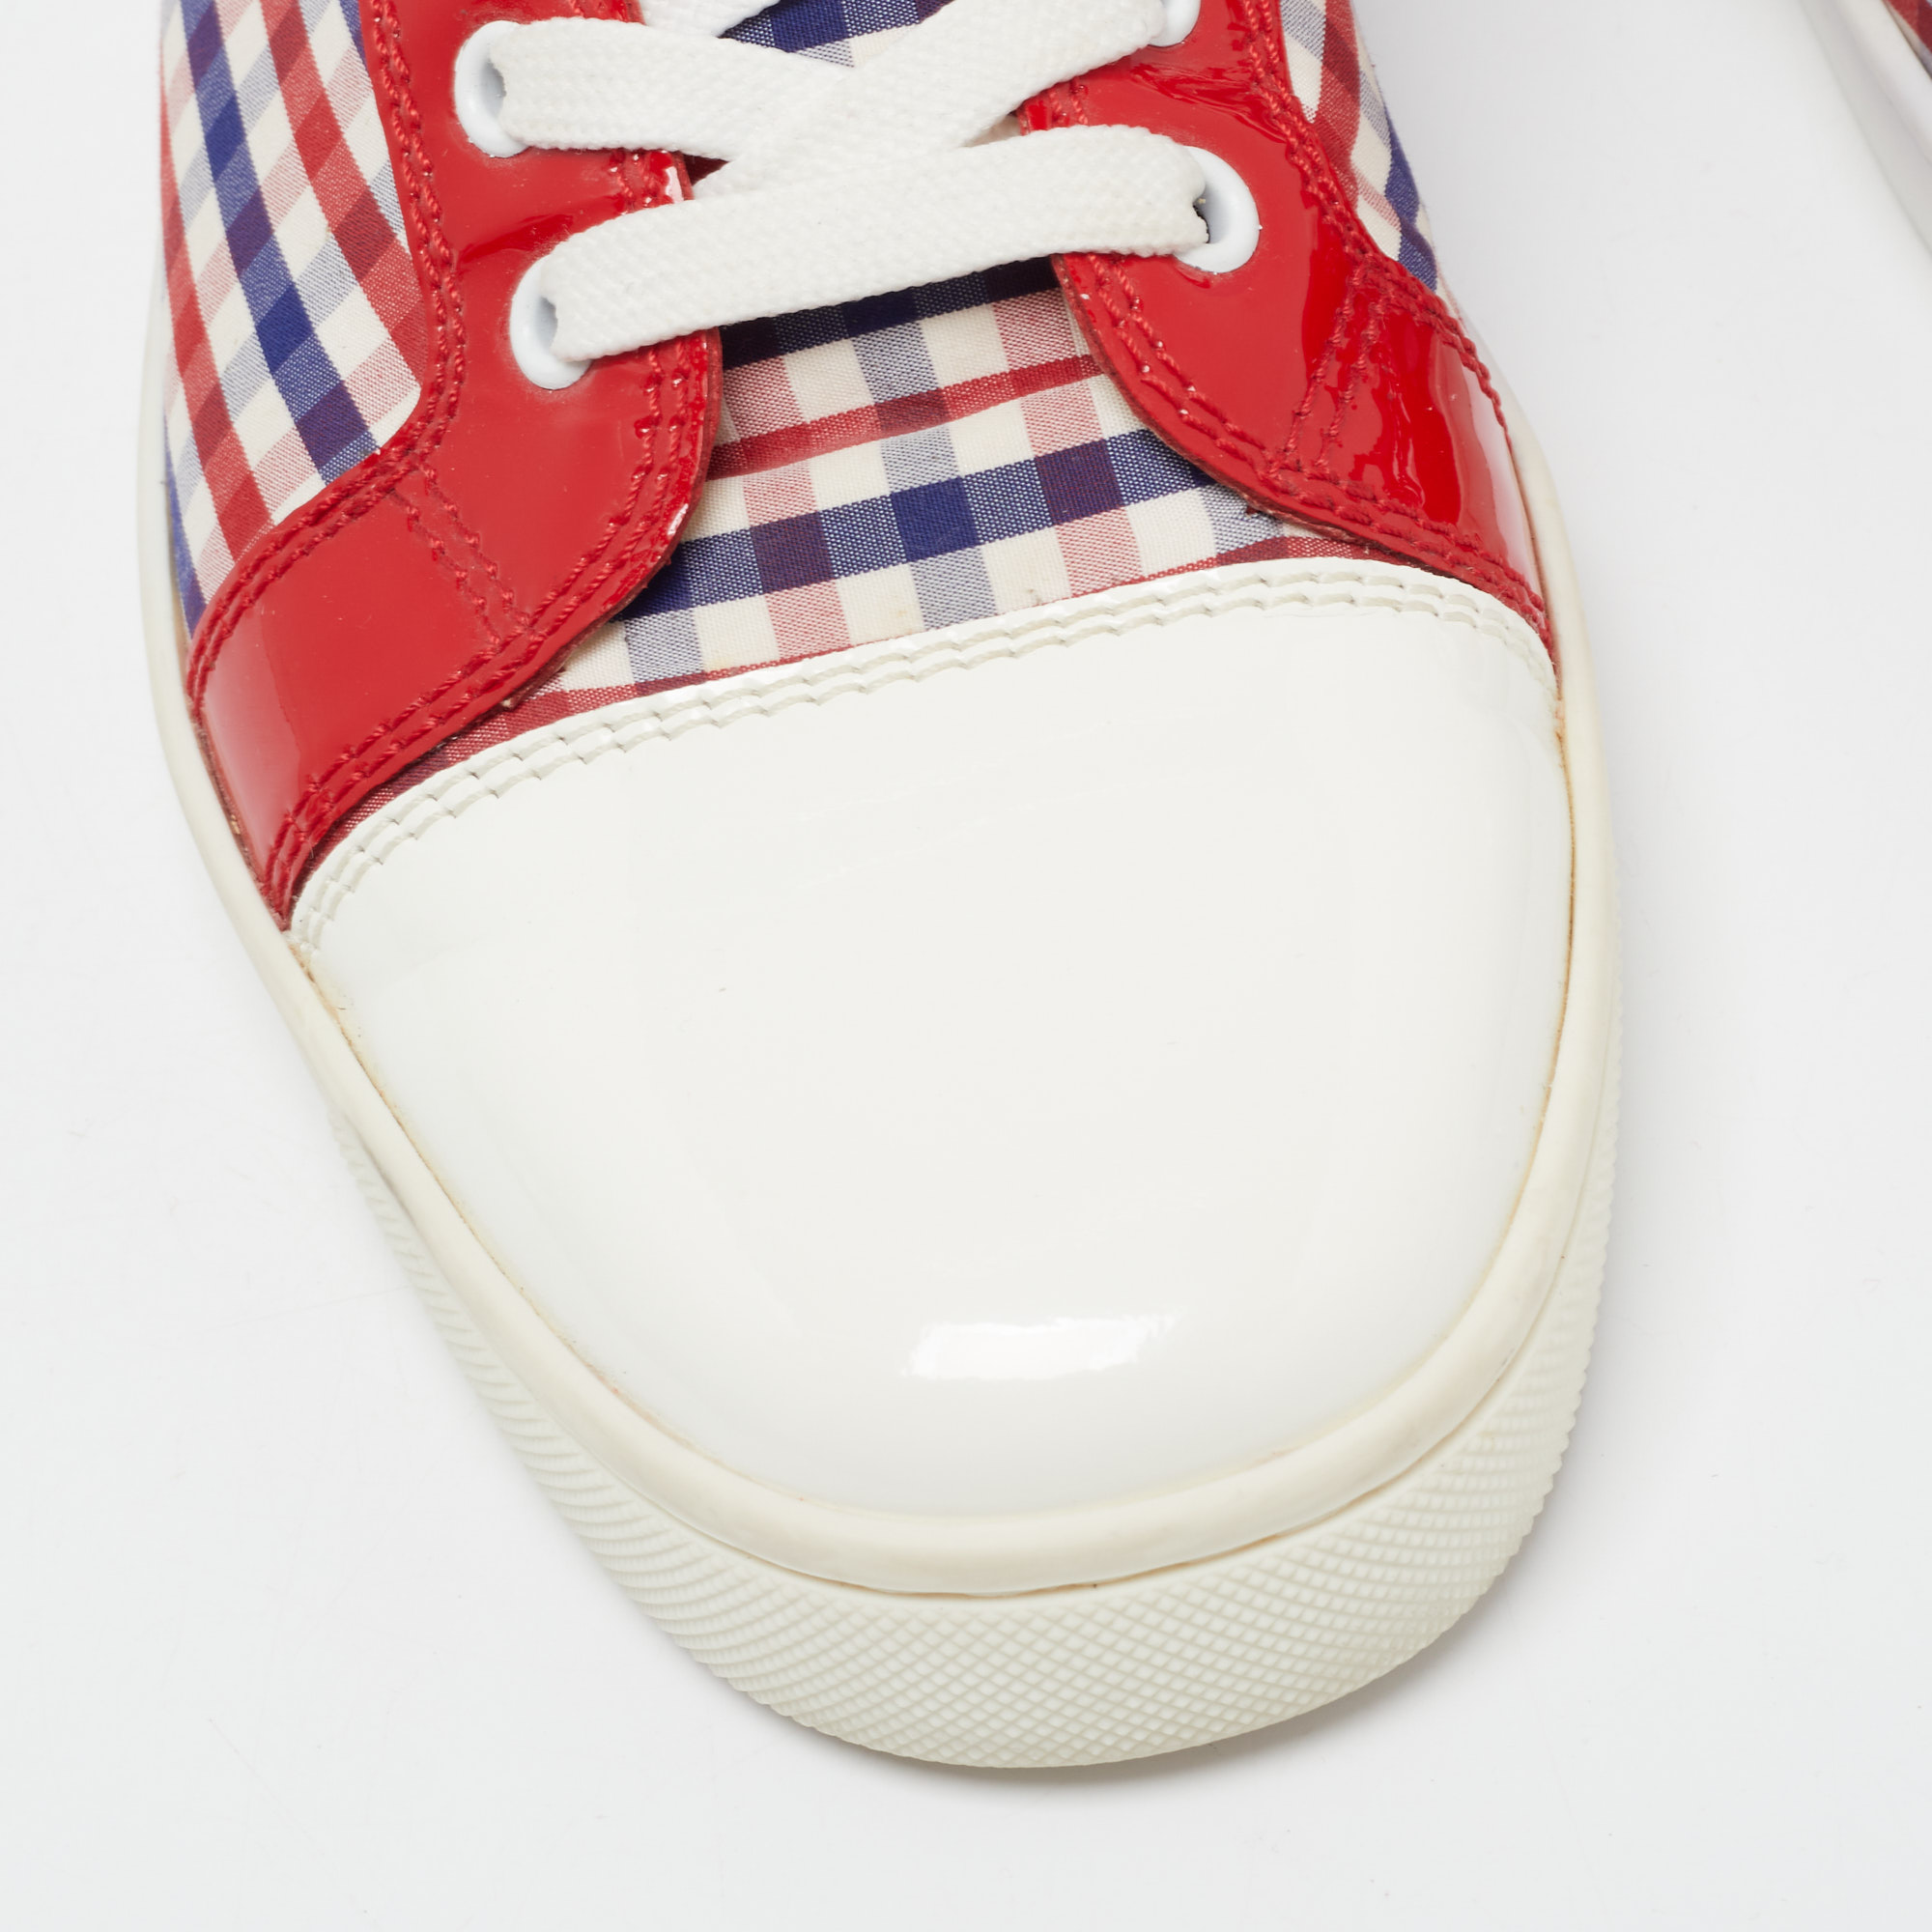 Christian Louboutin Tricolor Patent Leather And Plaid Fabric Louis High Top Sneakers Size 40